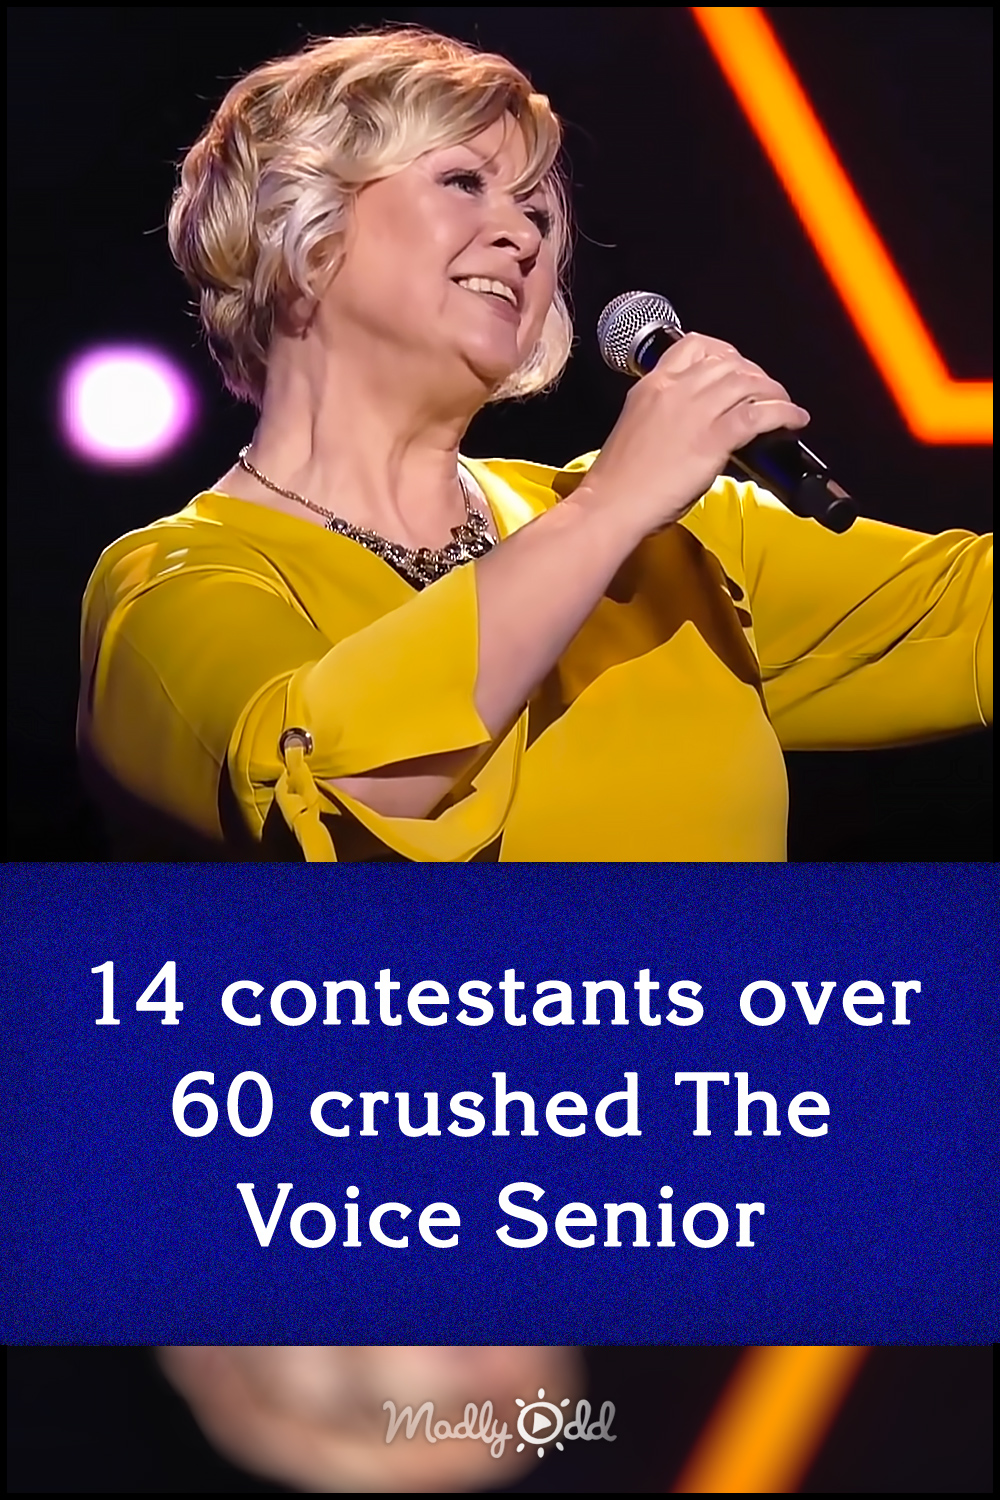 14 contestants over 60 crushed The Voice Senior